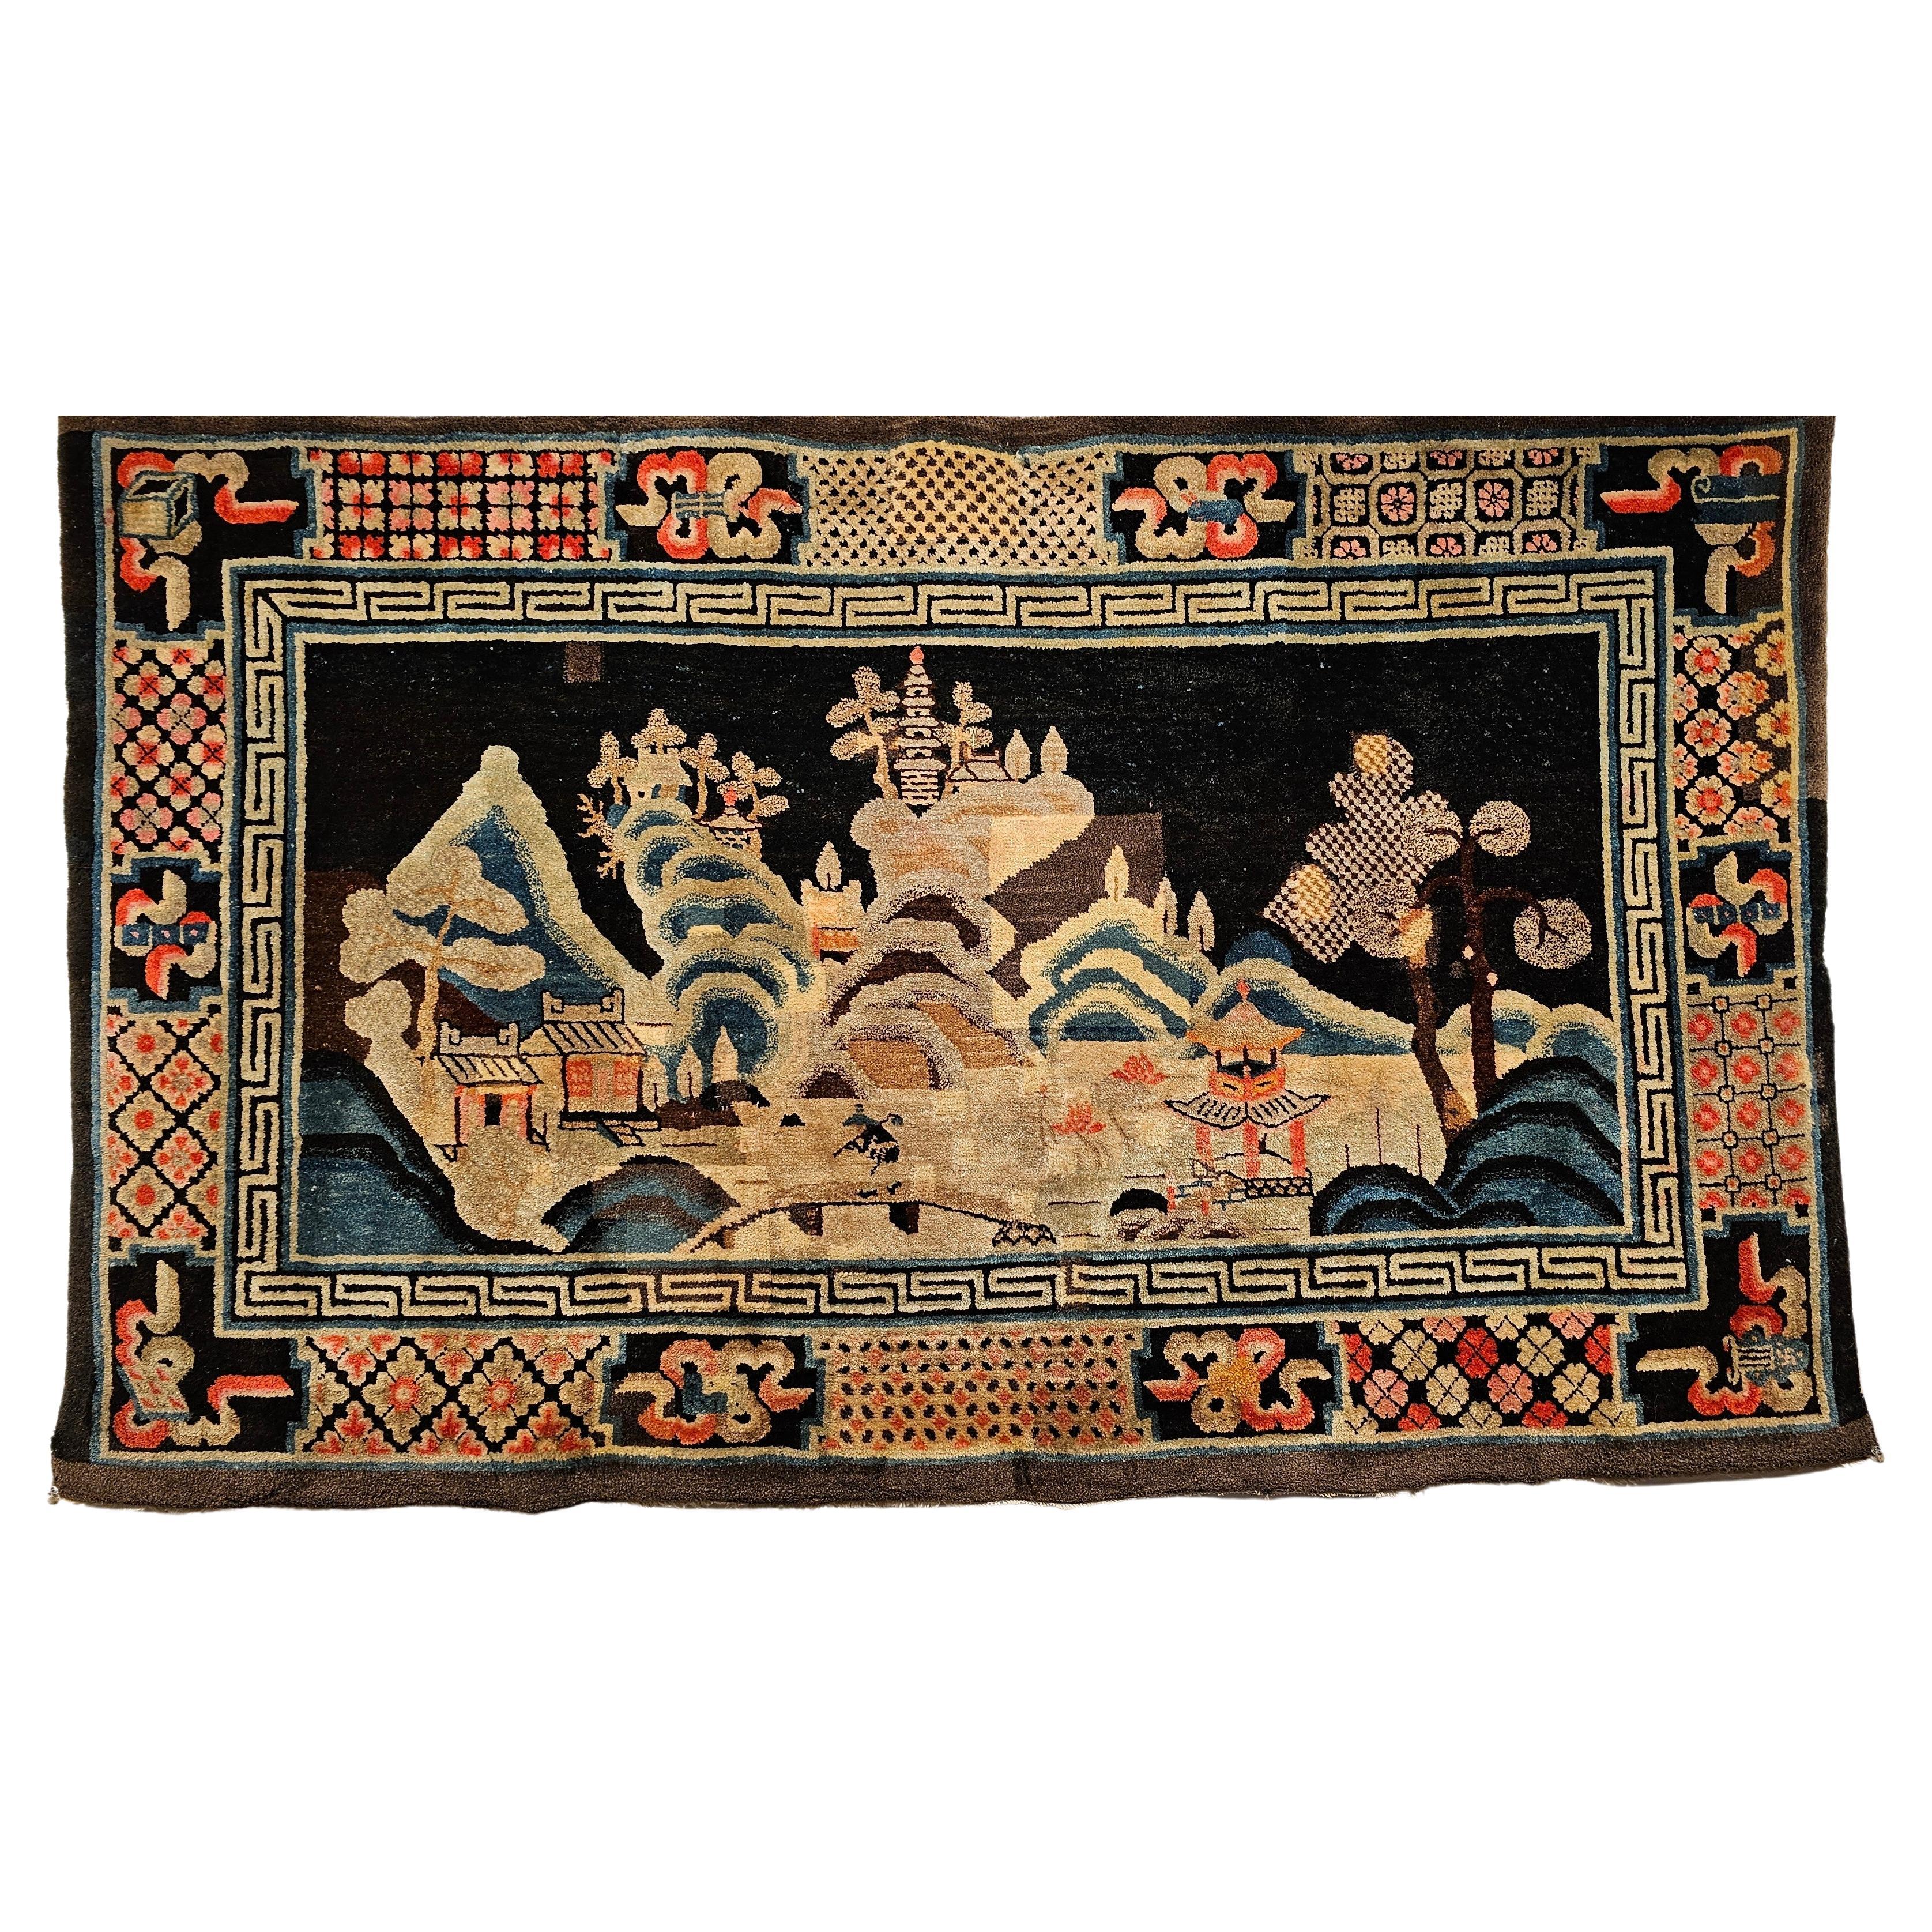 Late 1800s Ningxia Chinese Rug with A Pictorial Design of Forest, Mountains For Sale